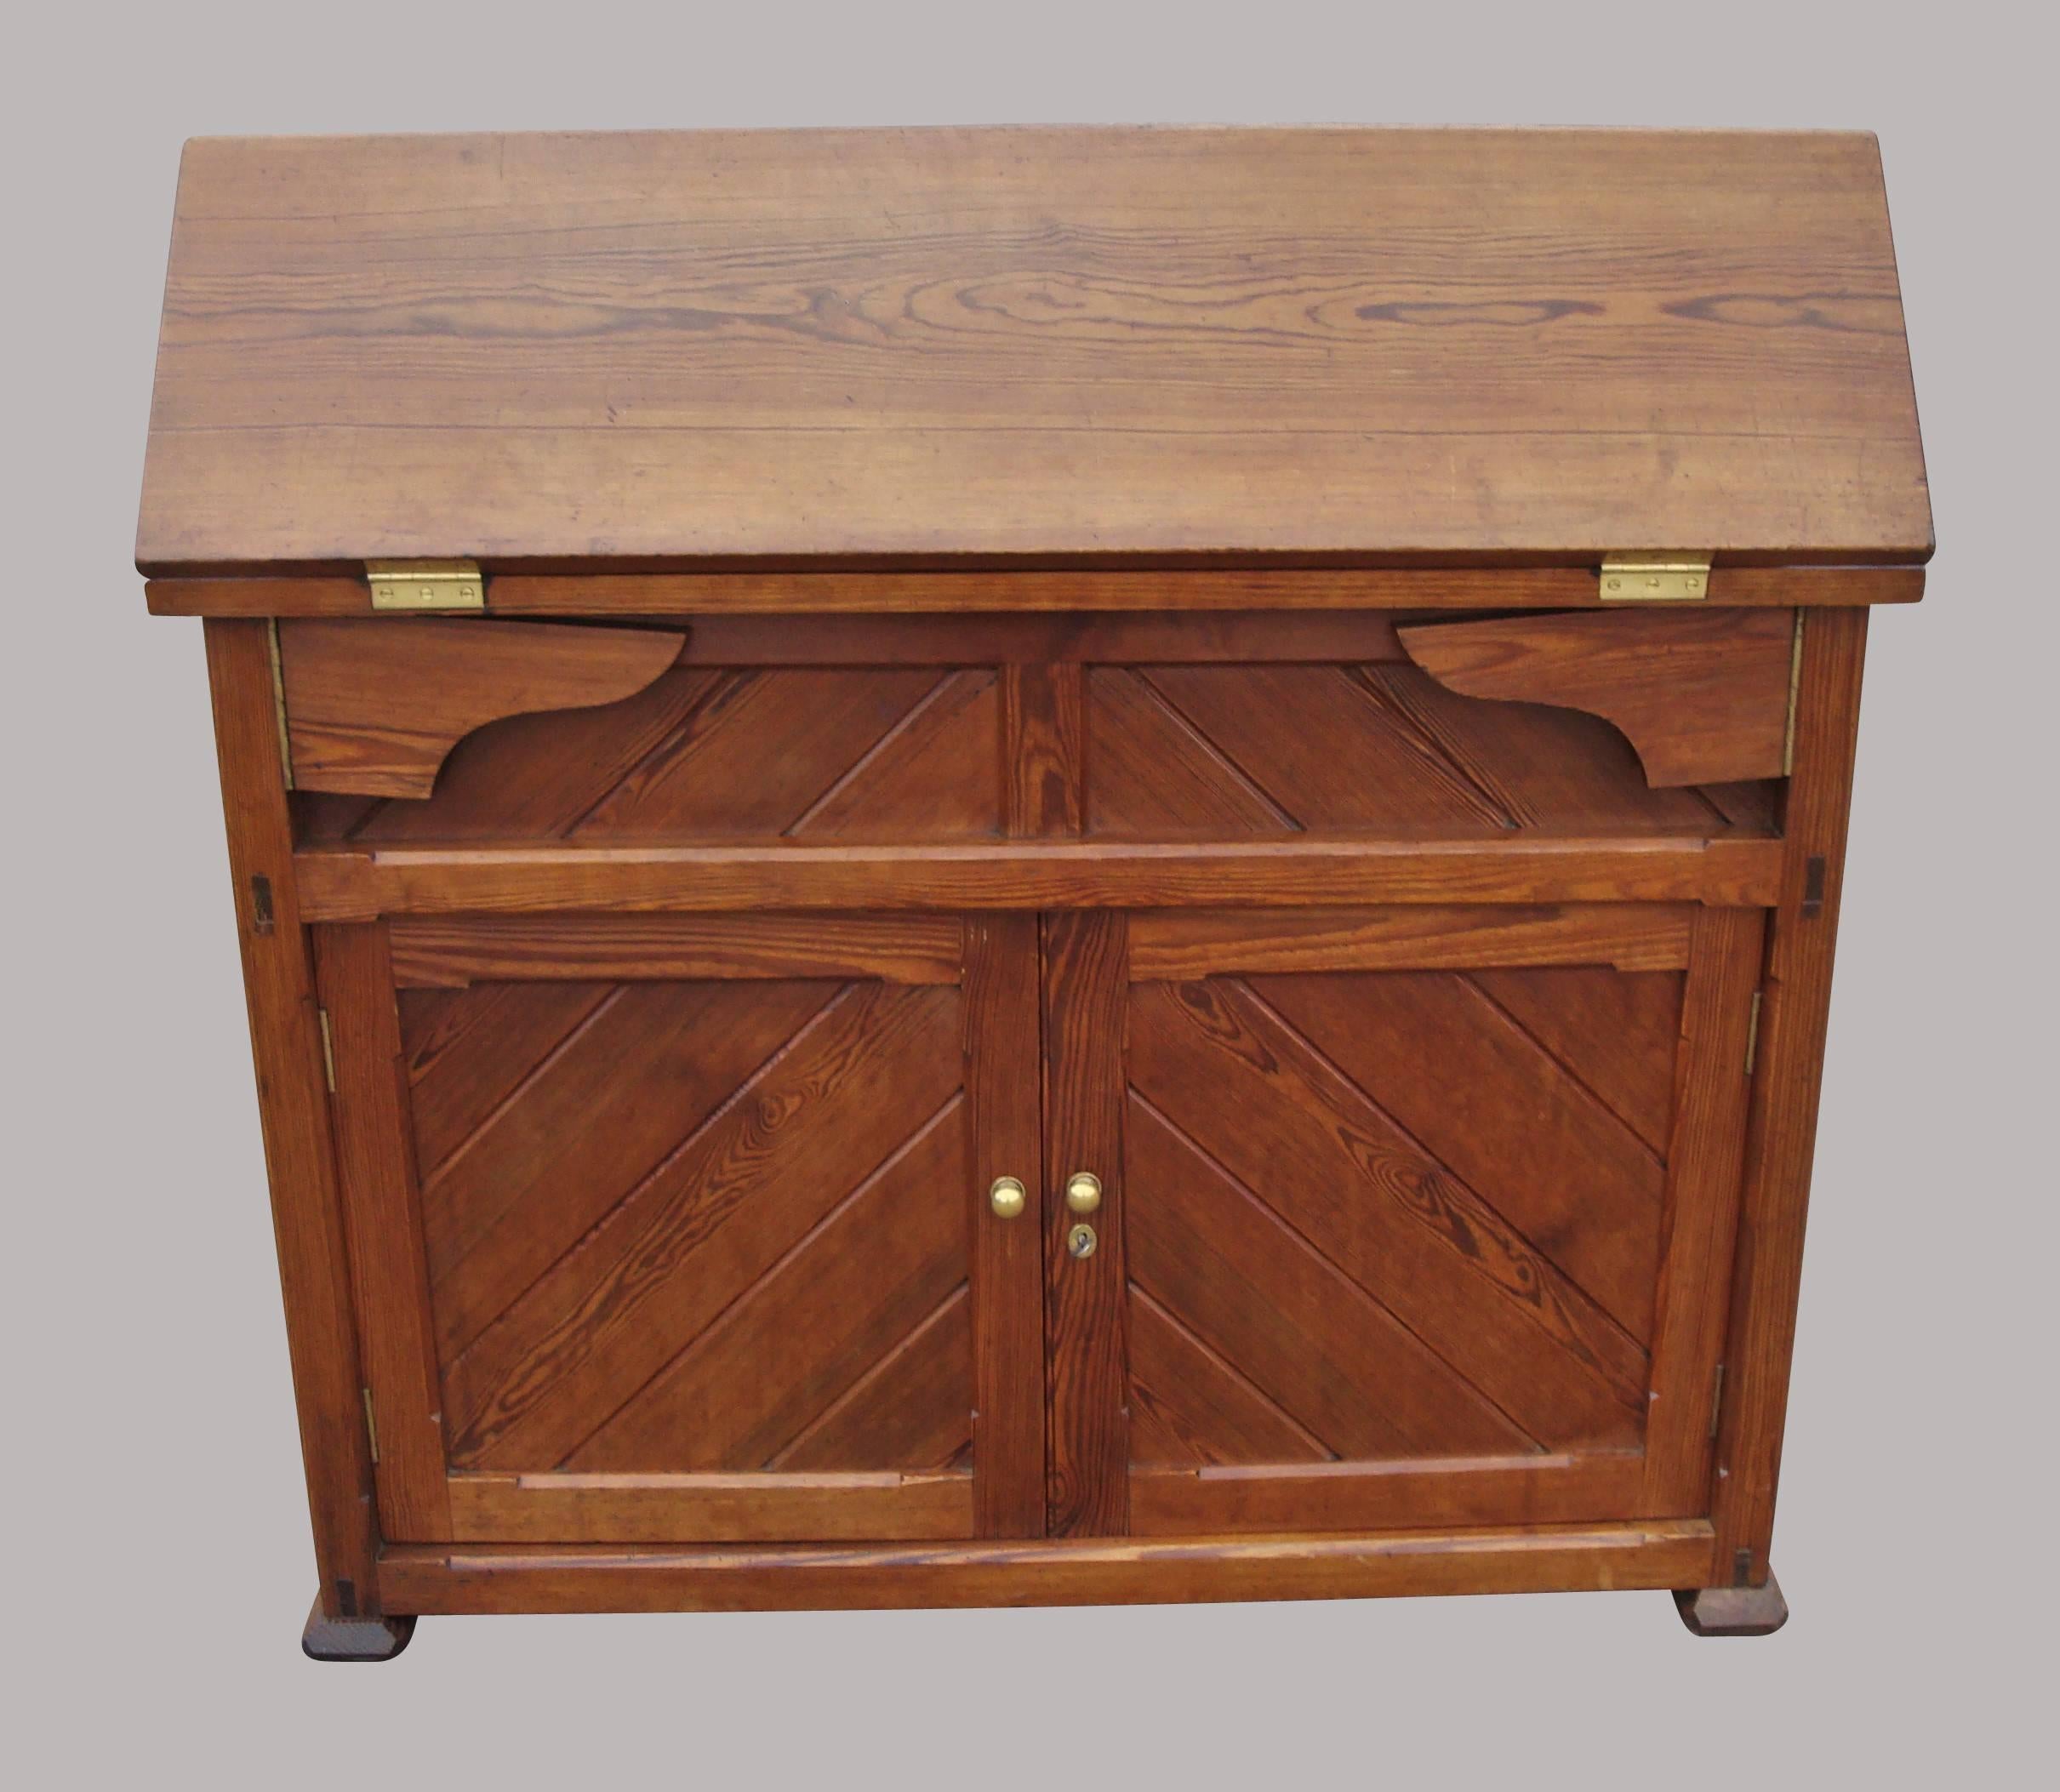 A rare late 19th century pitch pine saddle horse or saddle rack; the hinged gabled top opening to make a large flat surface, supported on a pair of folding shaped supports to either side. The main body, which is panelled to all sides and of tapering